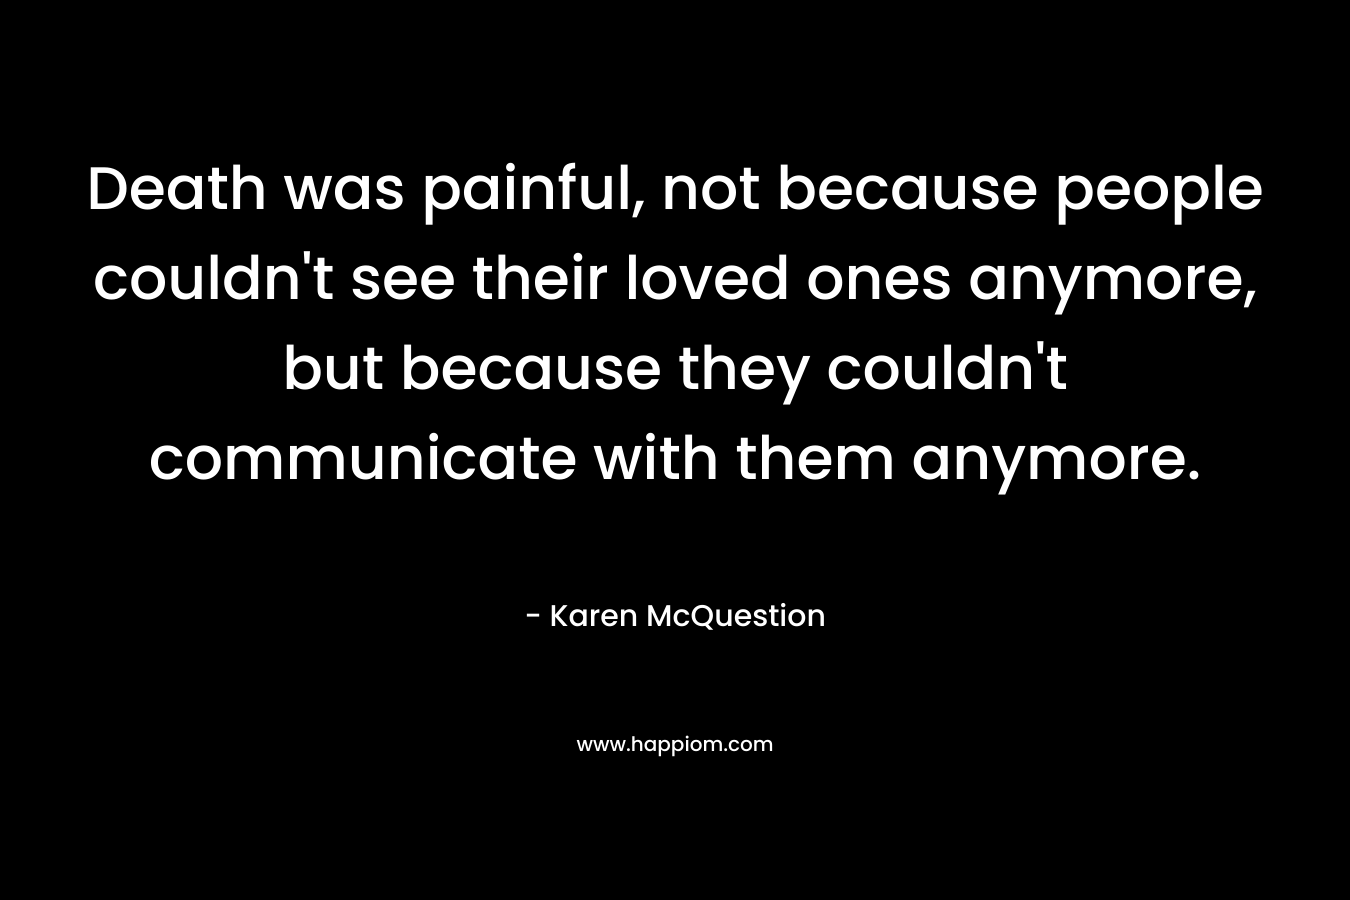 Death was painful, not because people couldn’t see their loved ones anymore, but because they couldn’t communicate with them anymore. – Karen McQuestion